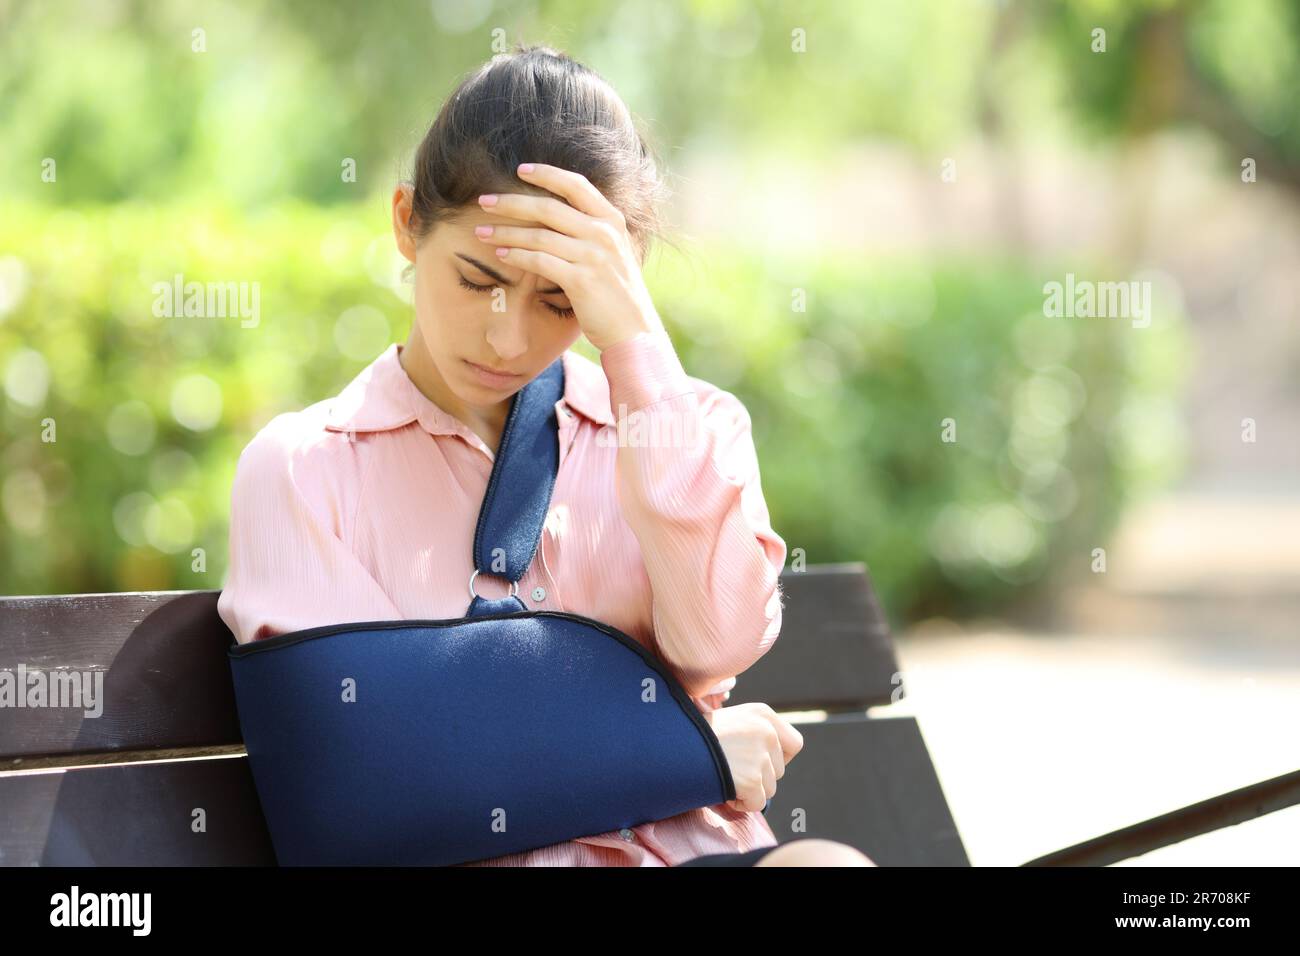 Worried convalescent woman sitting on a bench complaining in a park Stock Photo